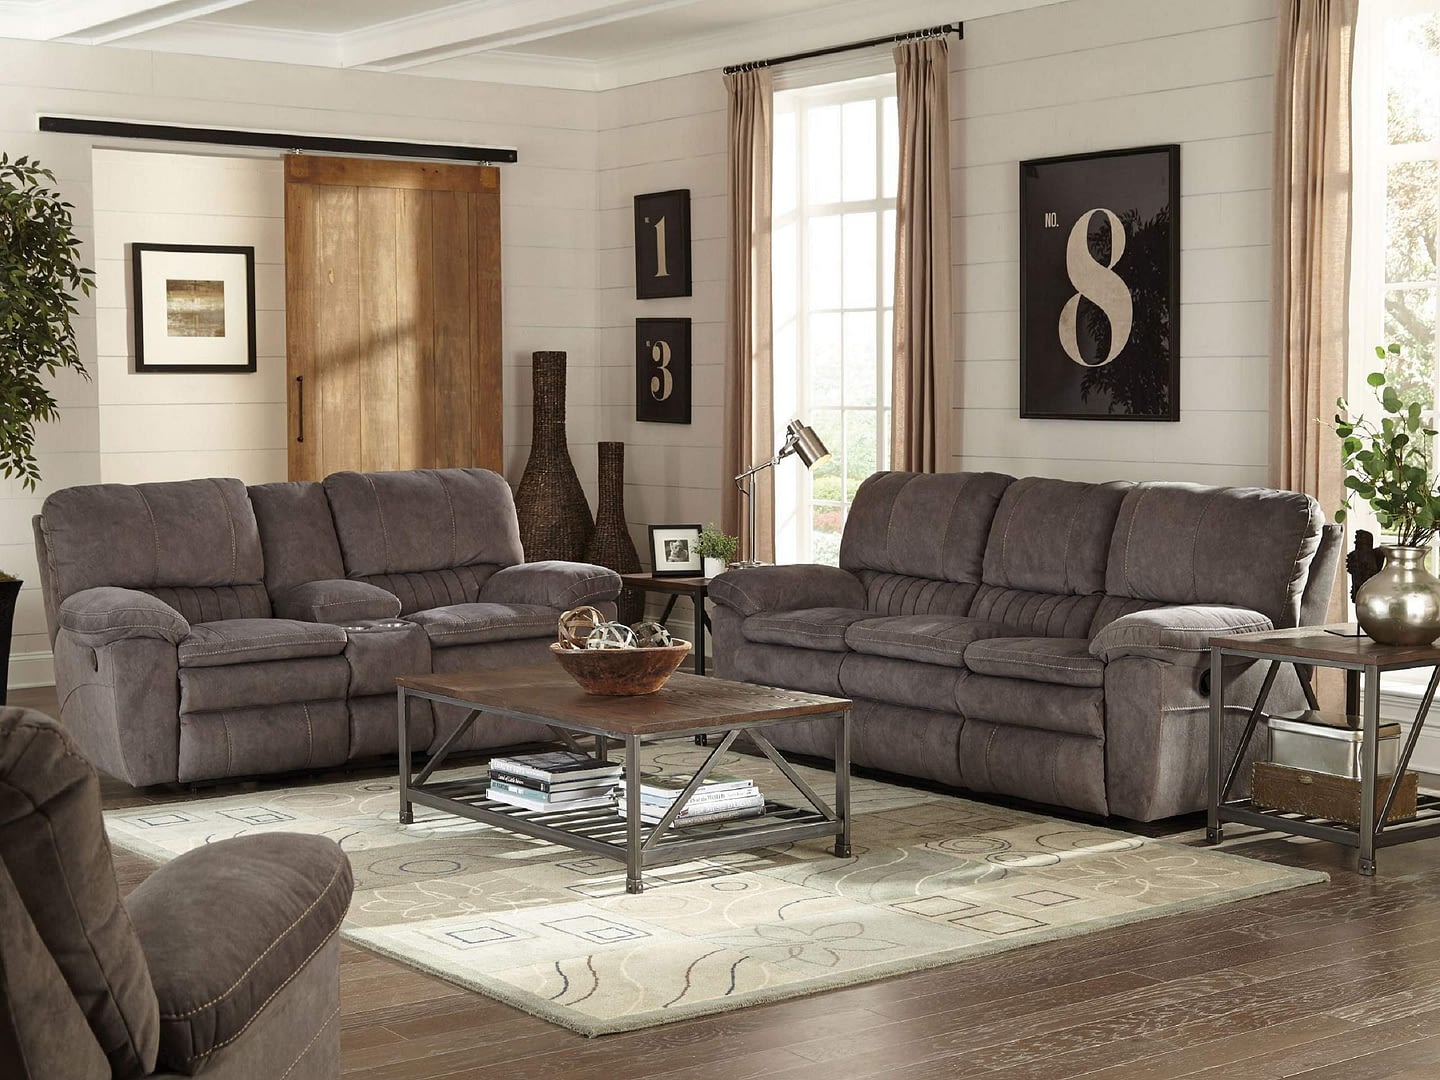 ZOLA Reclining Sofa & Love-seat with Console